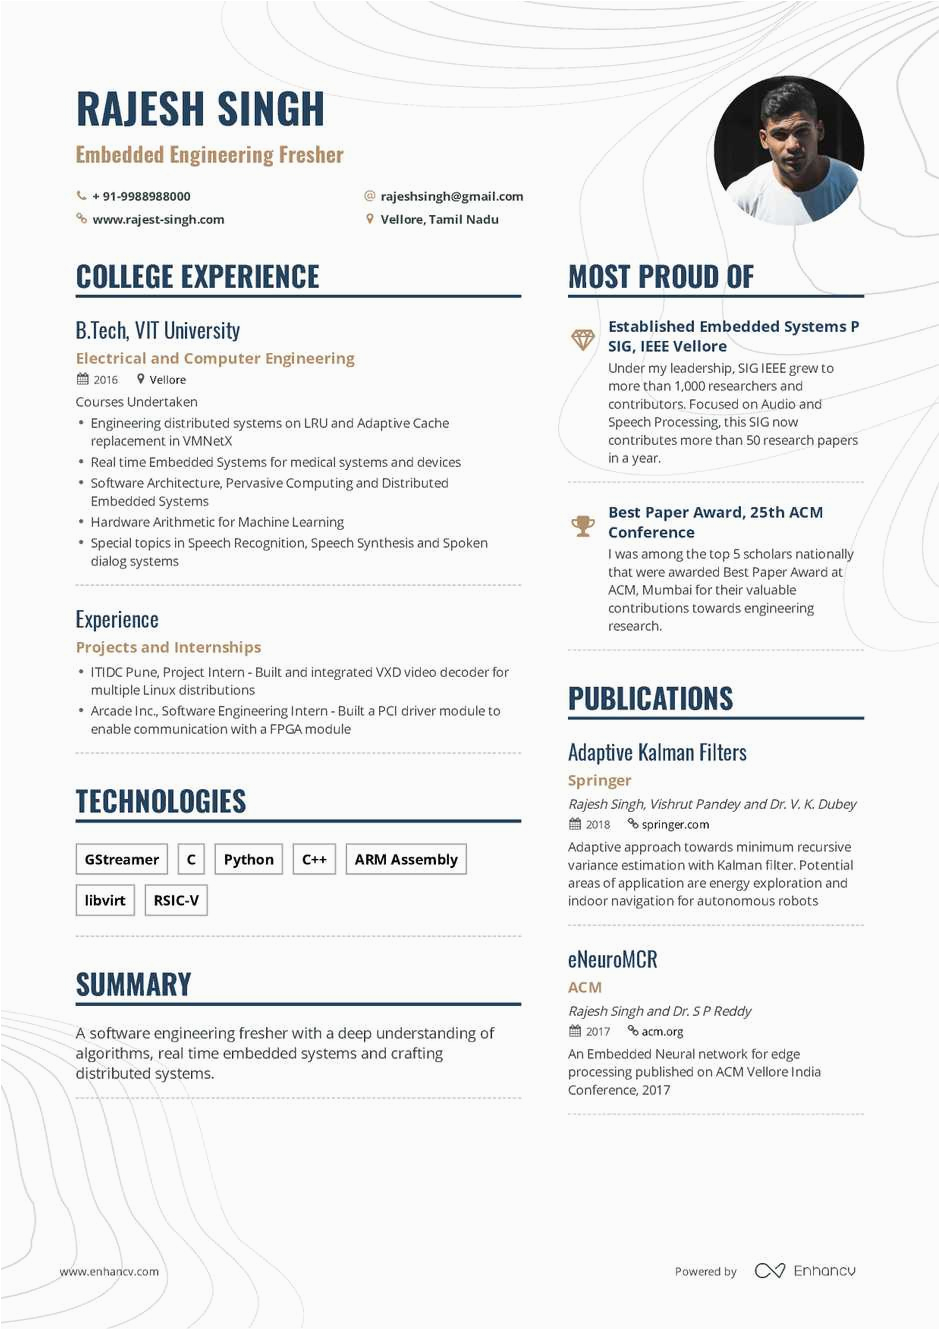 Sample Summary for Resume for Freshers the Best 2019 Fresher Resume formats and Samples